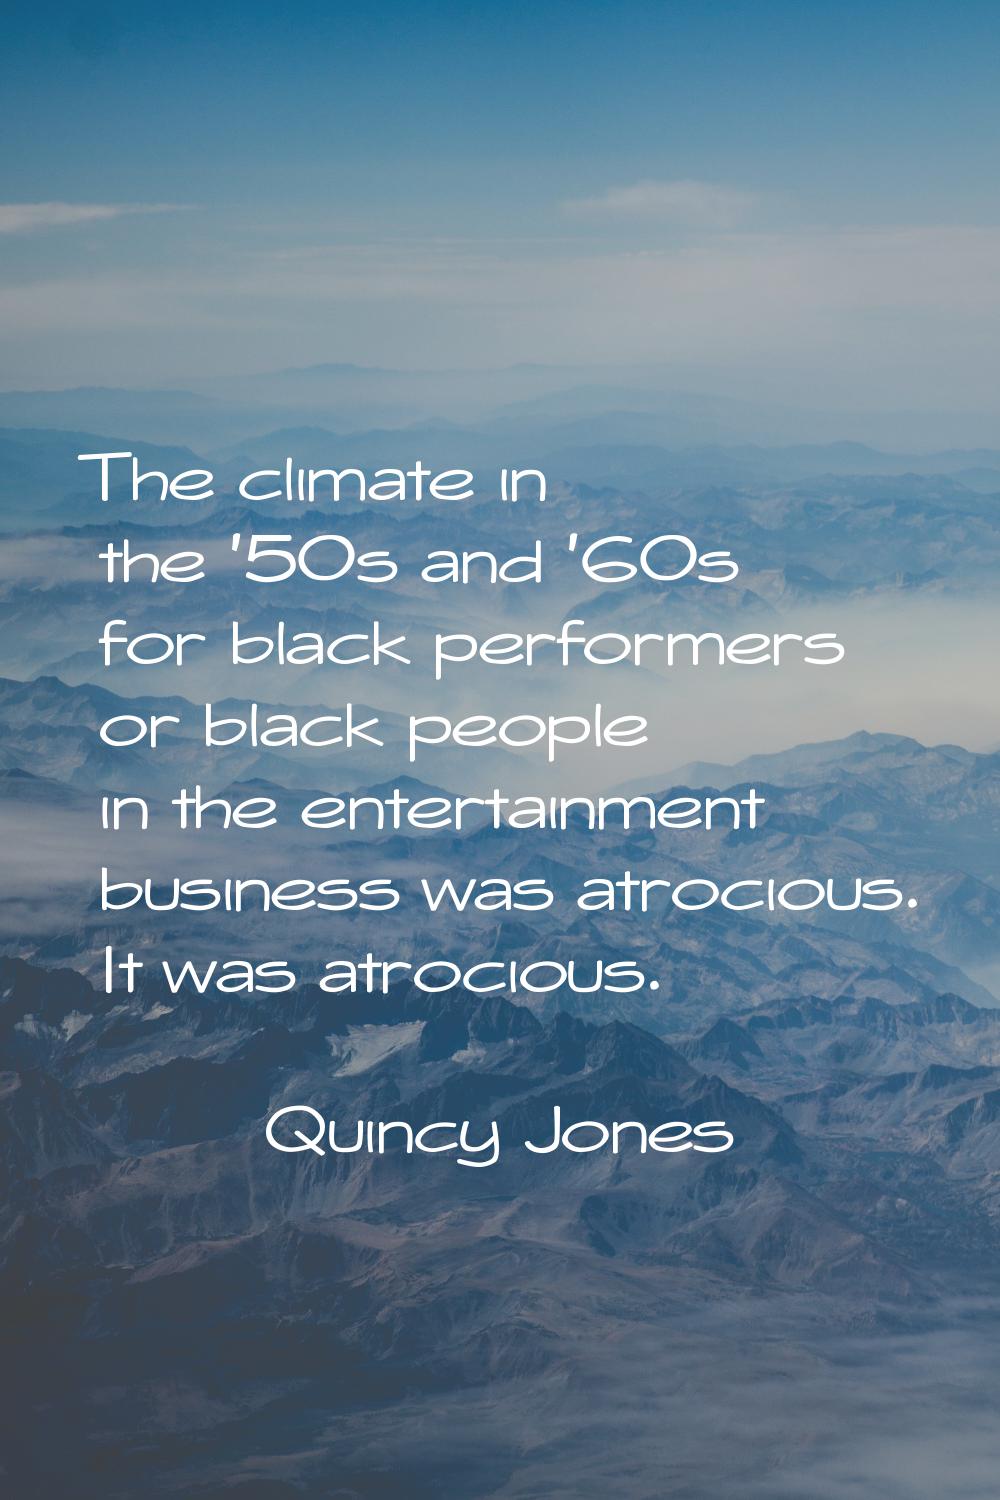 The climate in the '50s and '60s for black performers or black people in the entertainment business